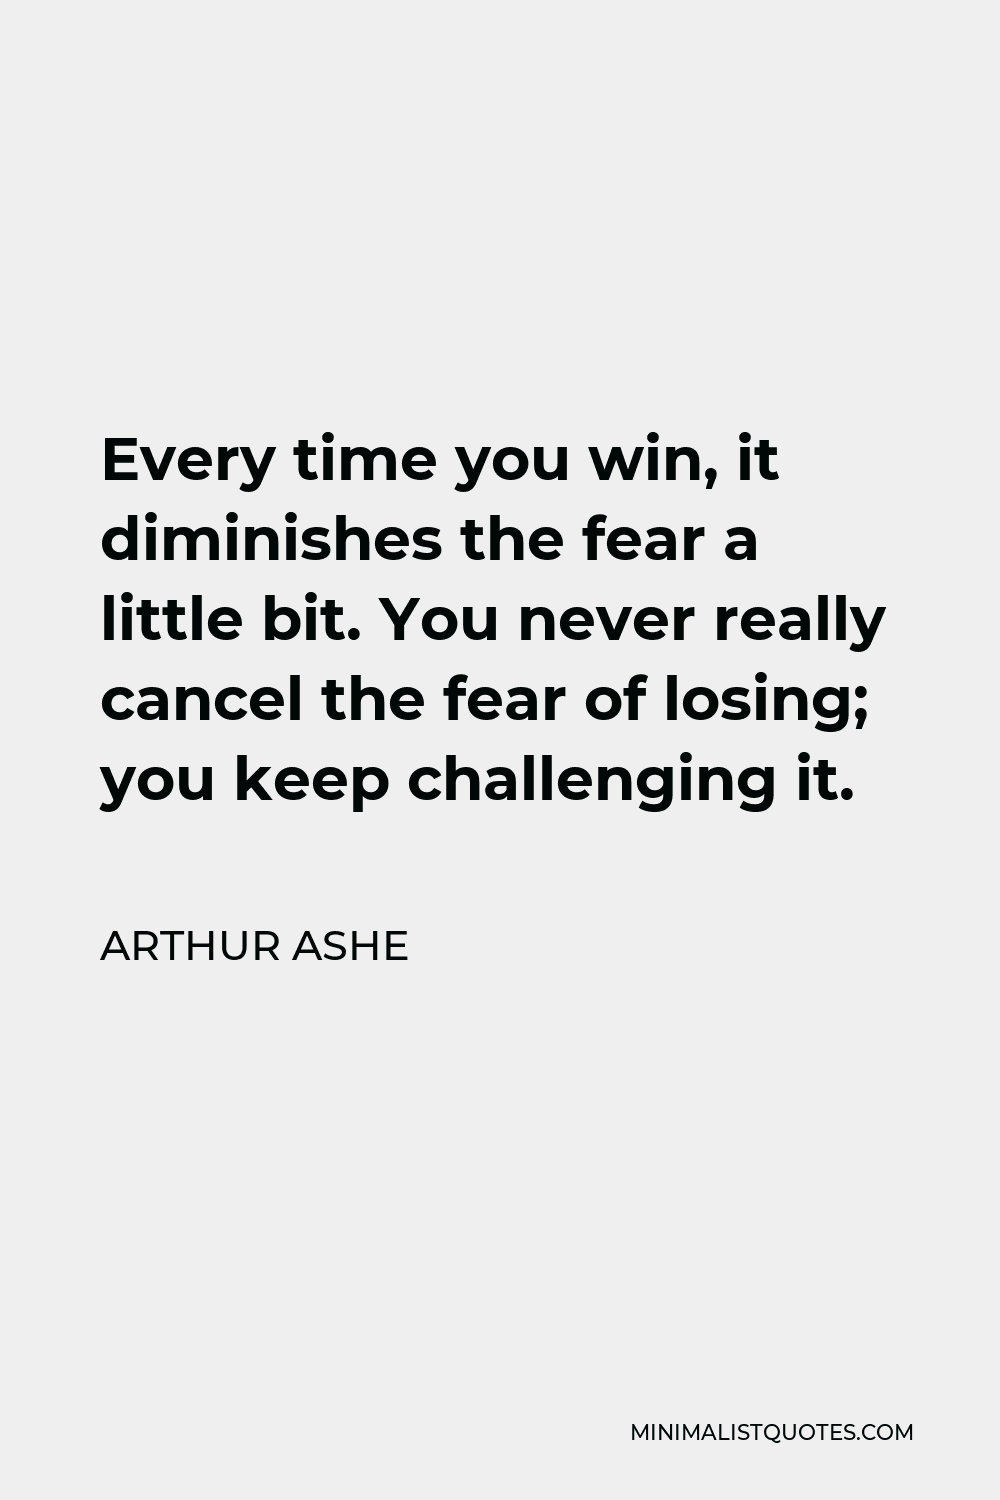 Arthur Ashe Quote - Every time you win, it diminishes the fear a little bit. You never really cancel the fear of losing; you keep challenging it.